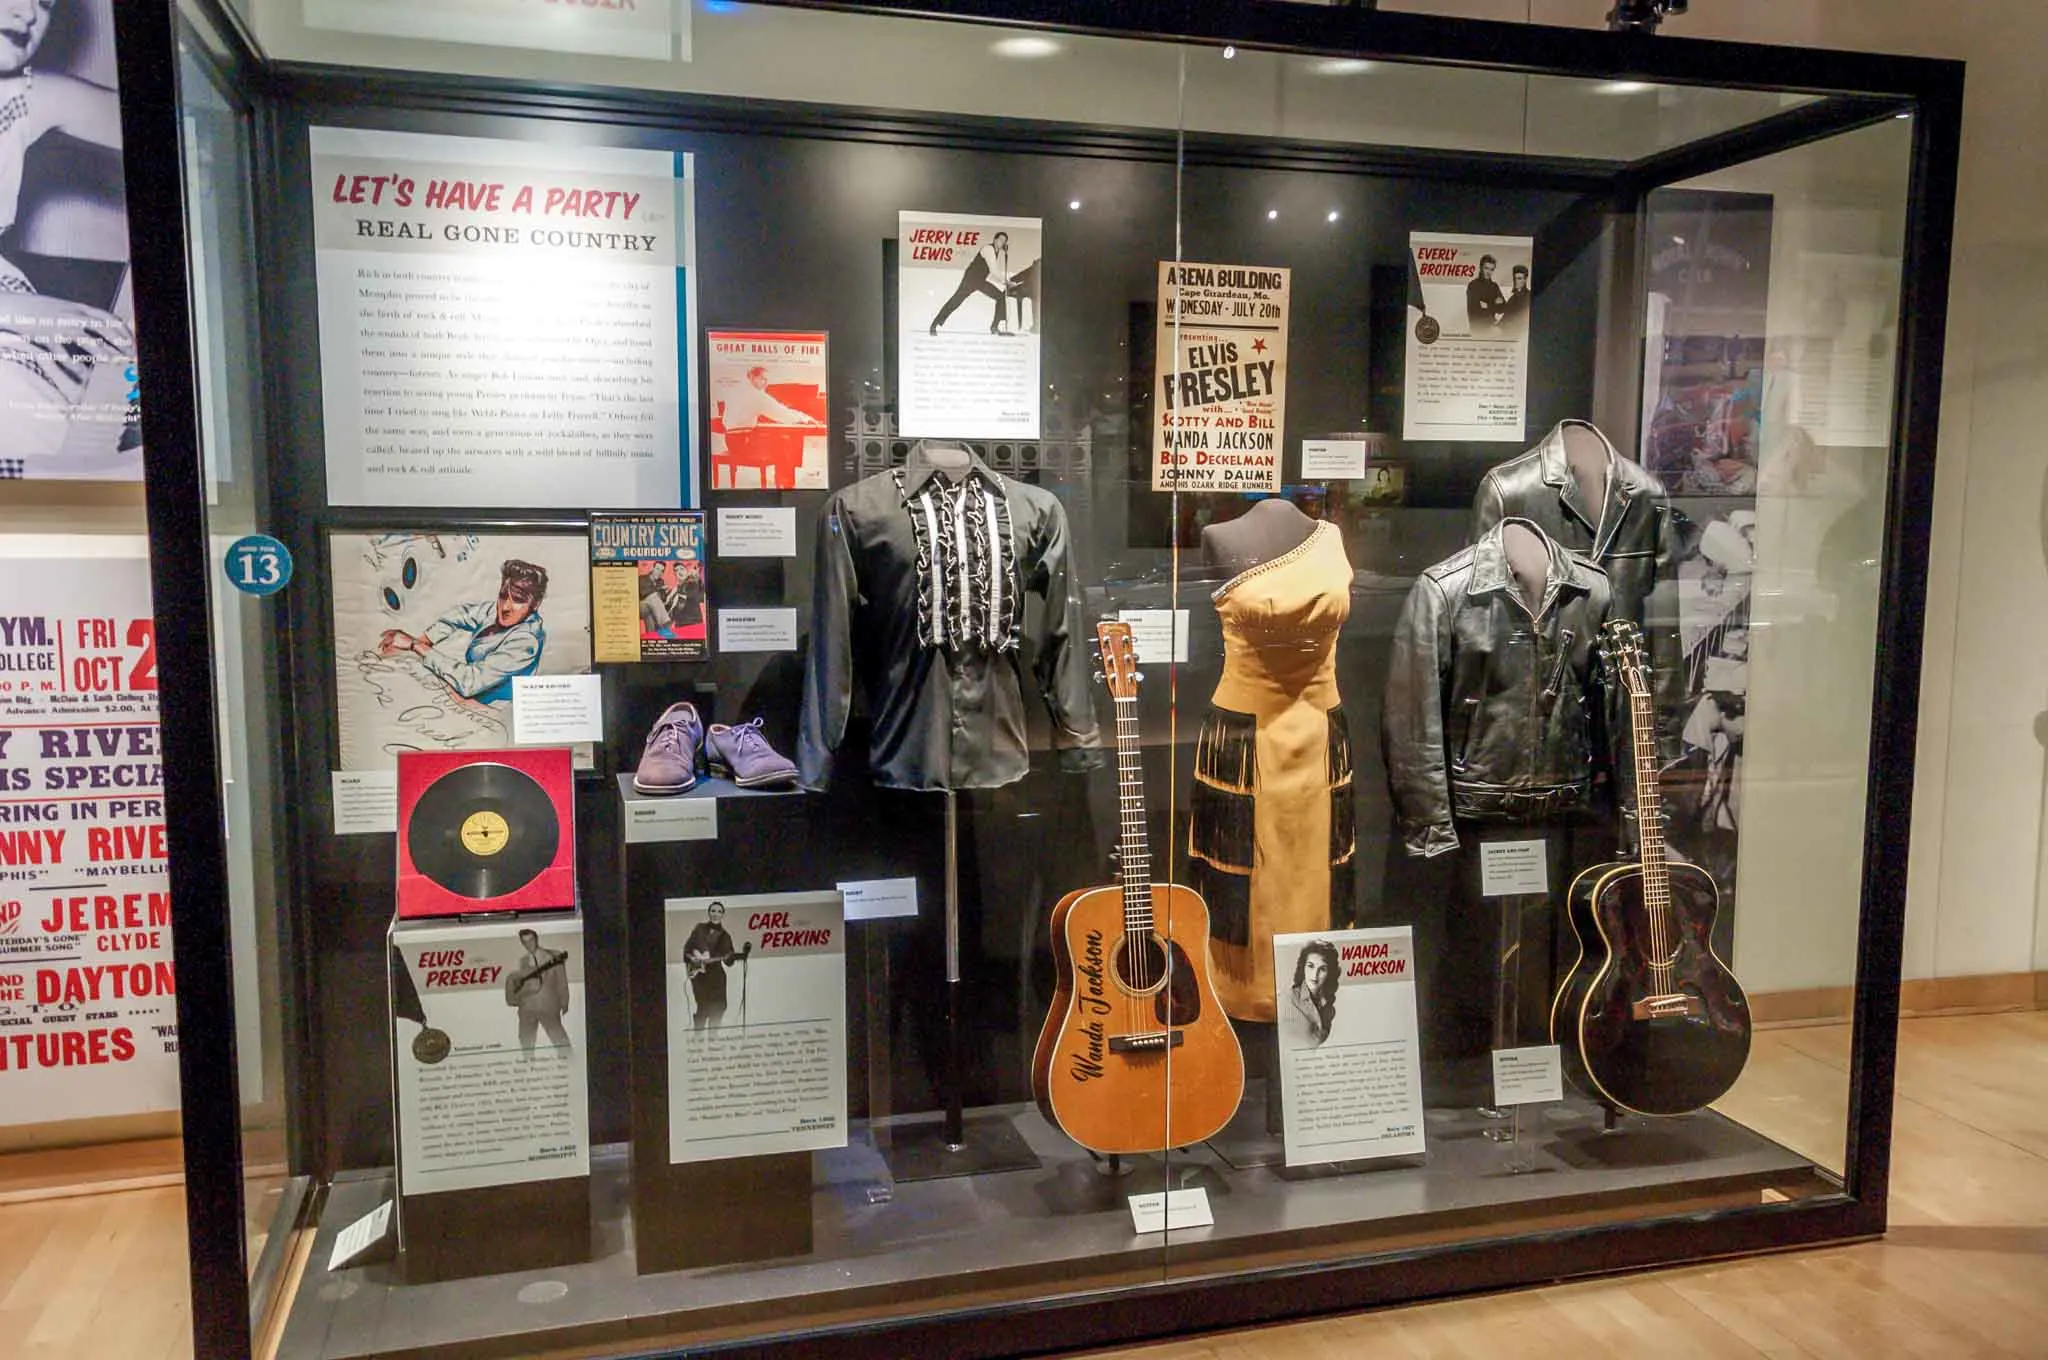 Clothes and instruments on display at the Country Music Hall of Fame